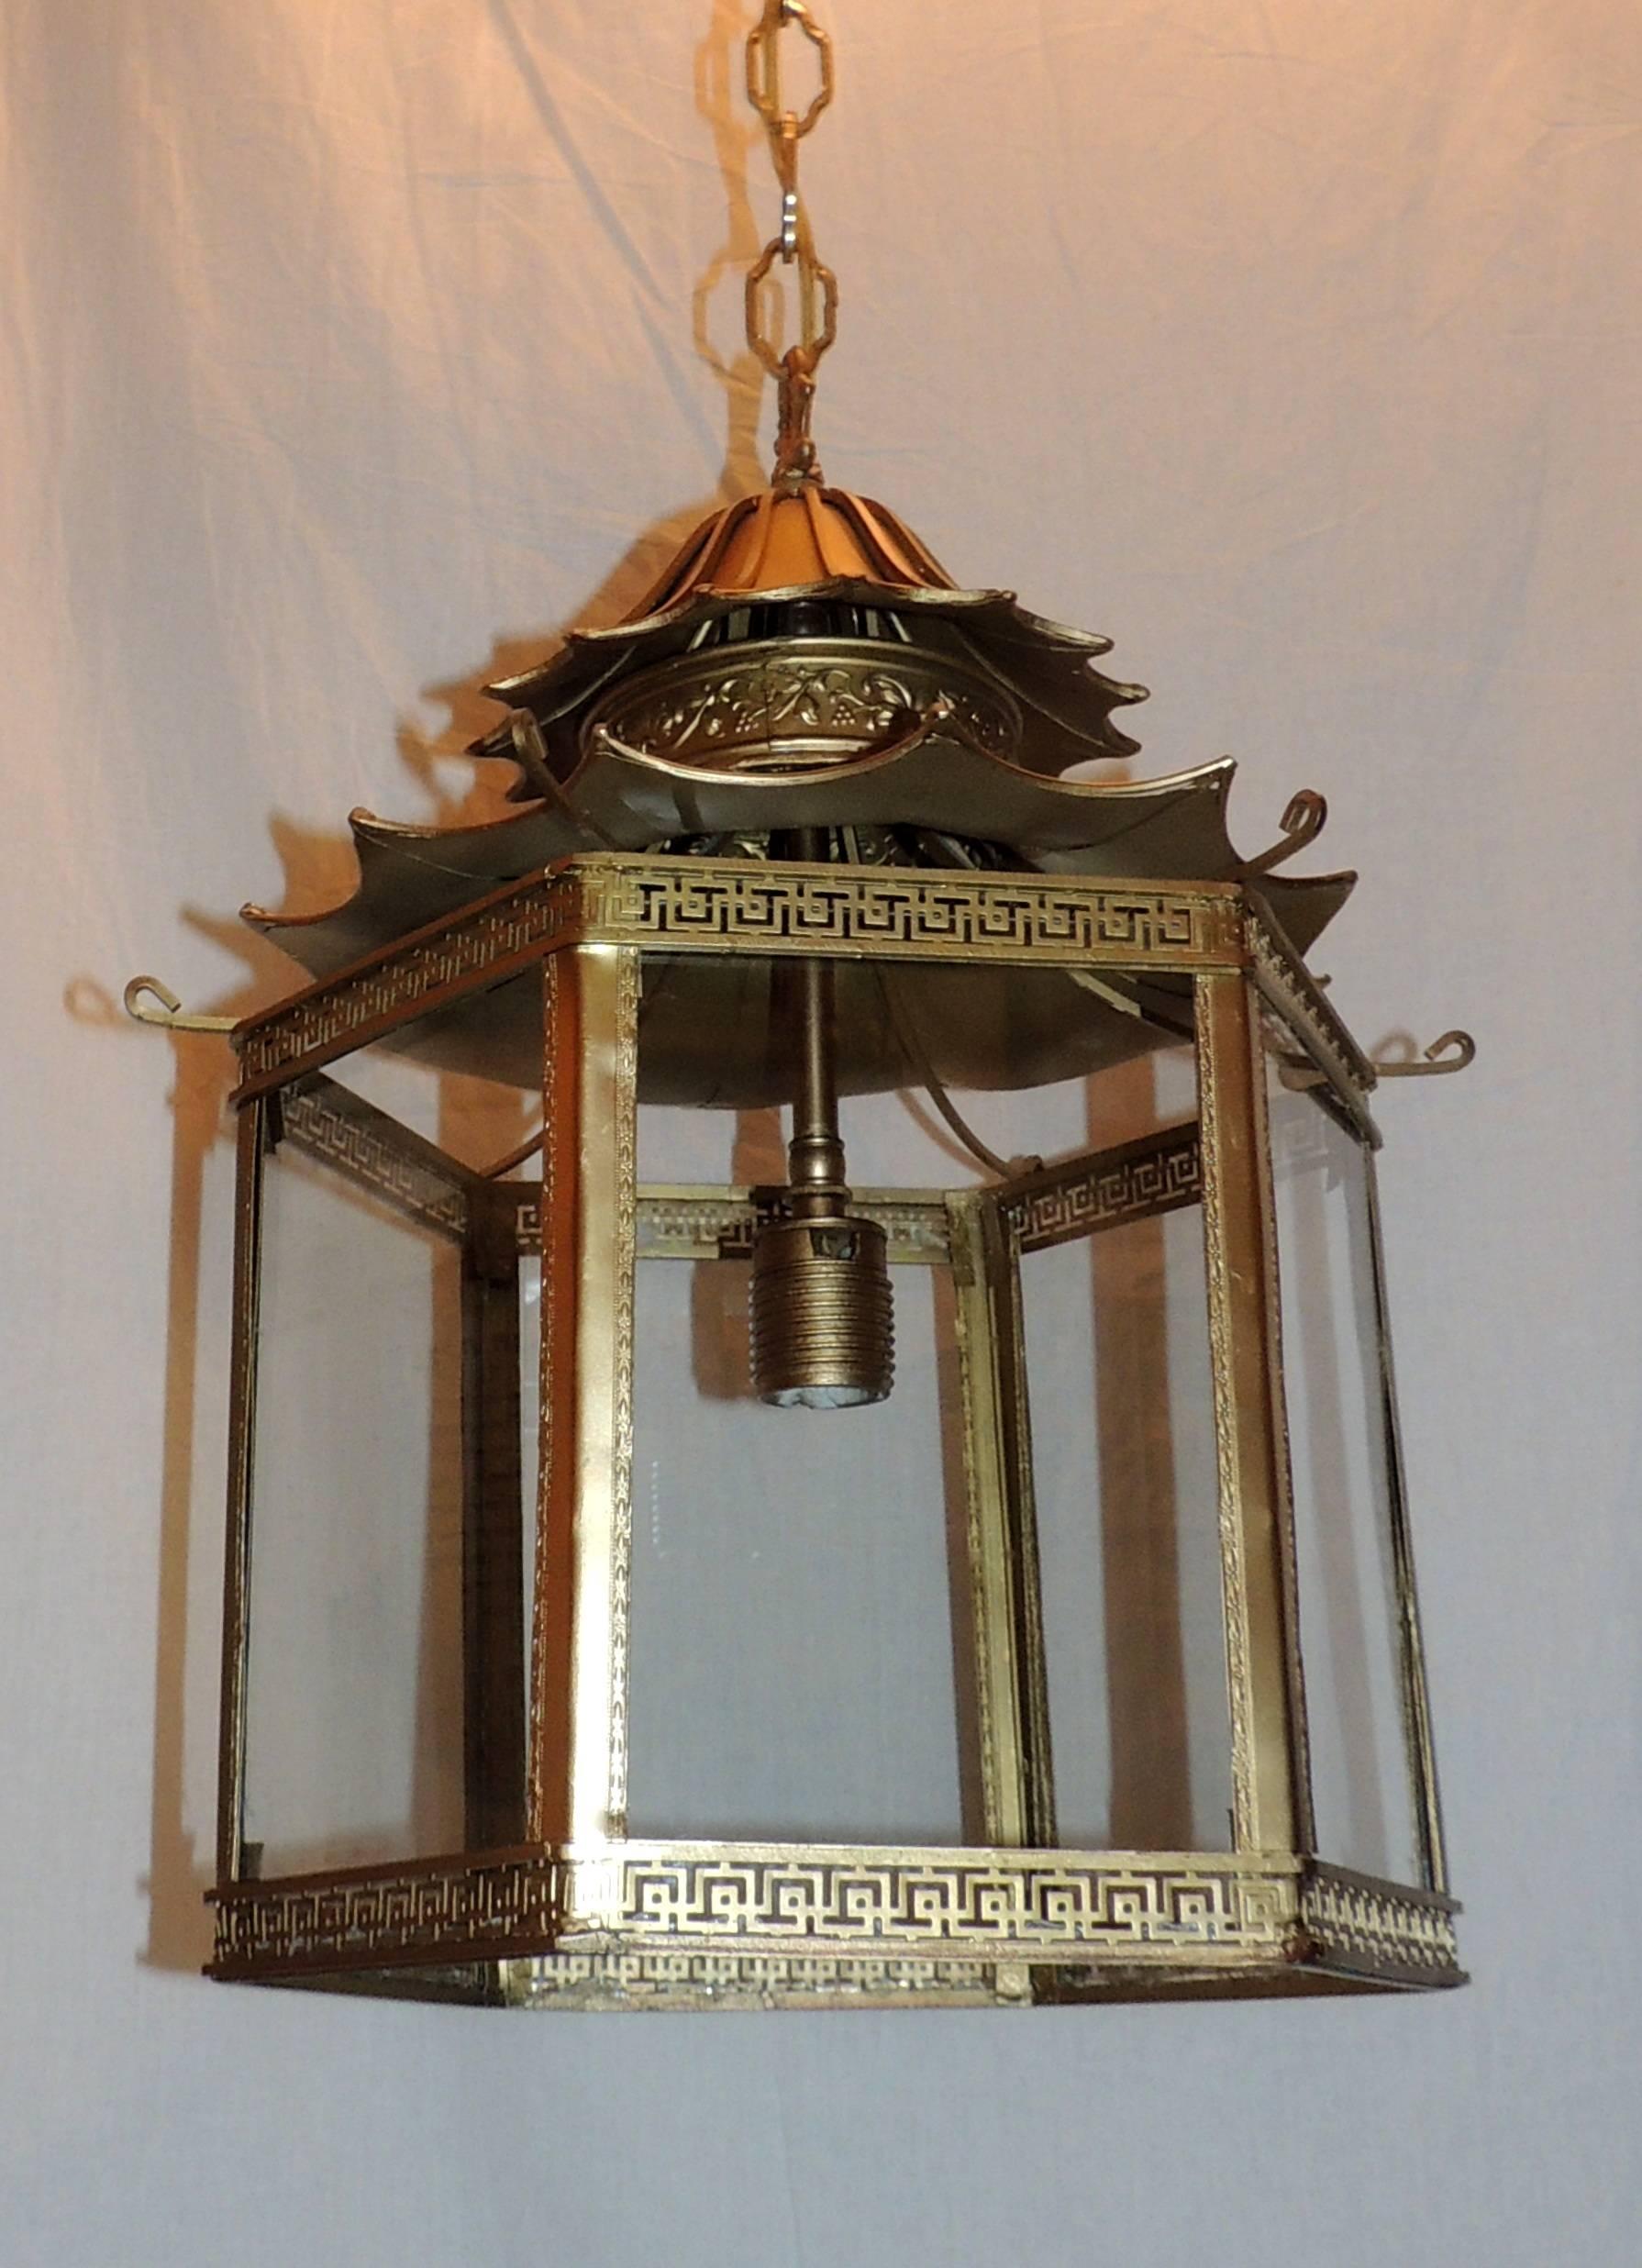 Wonderful French Gilt Bronze Pagoda 6 Panel Chinoiserie Octagonal Glass Lantern Fixture, Rewired With A New Socket Taking Up to 100 Watts. This Fixture Comes With As Much Chain As You Need As Well As Canopy And Mounting Hardware. 